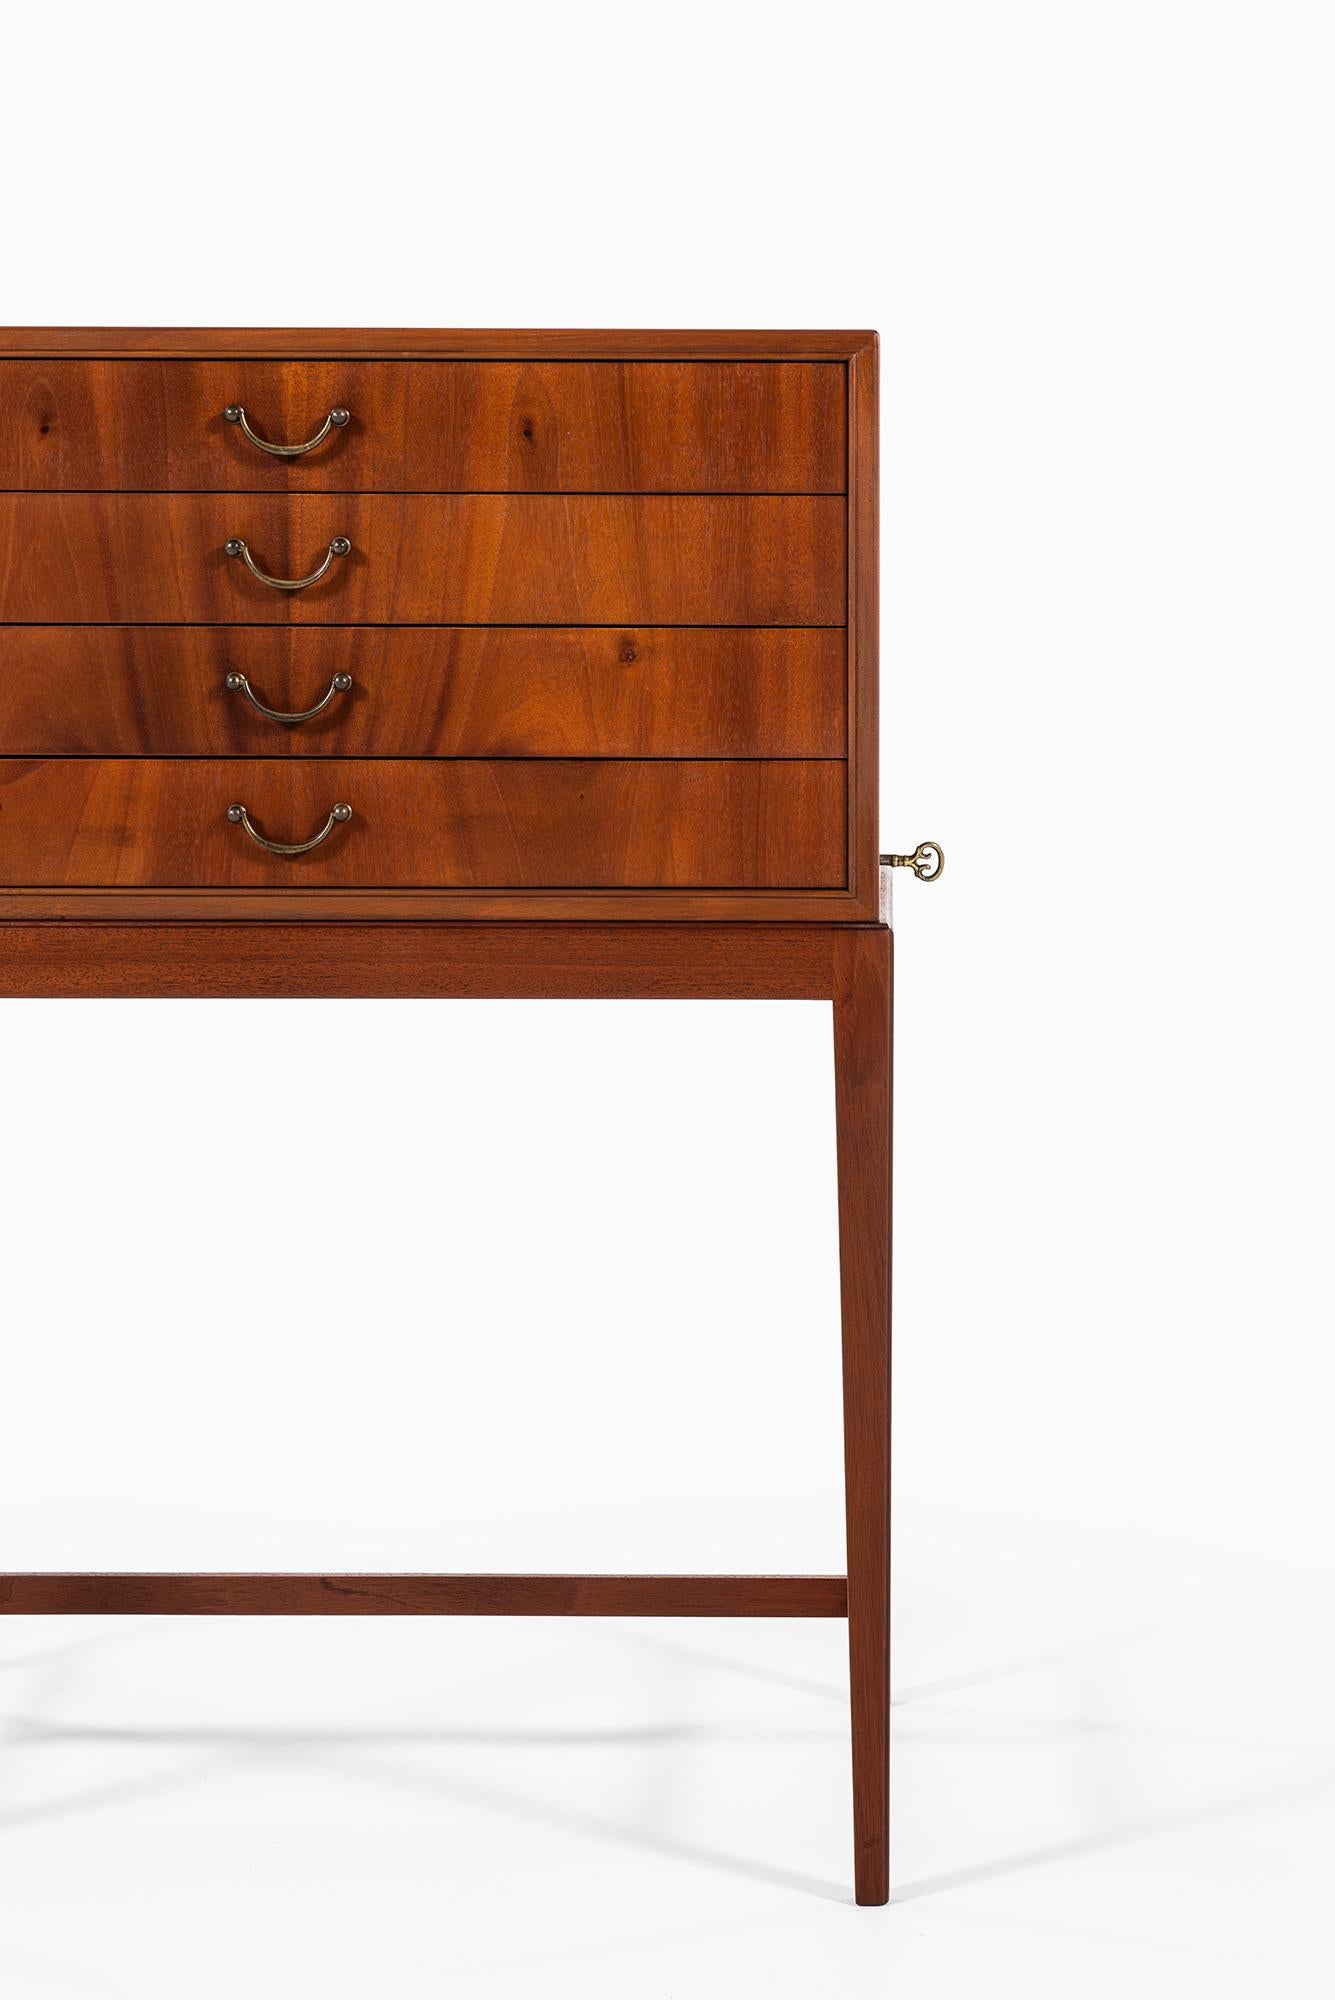 Danish Frits Henningsen Side Table in Mahogany and Brass Produced in Denmark